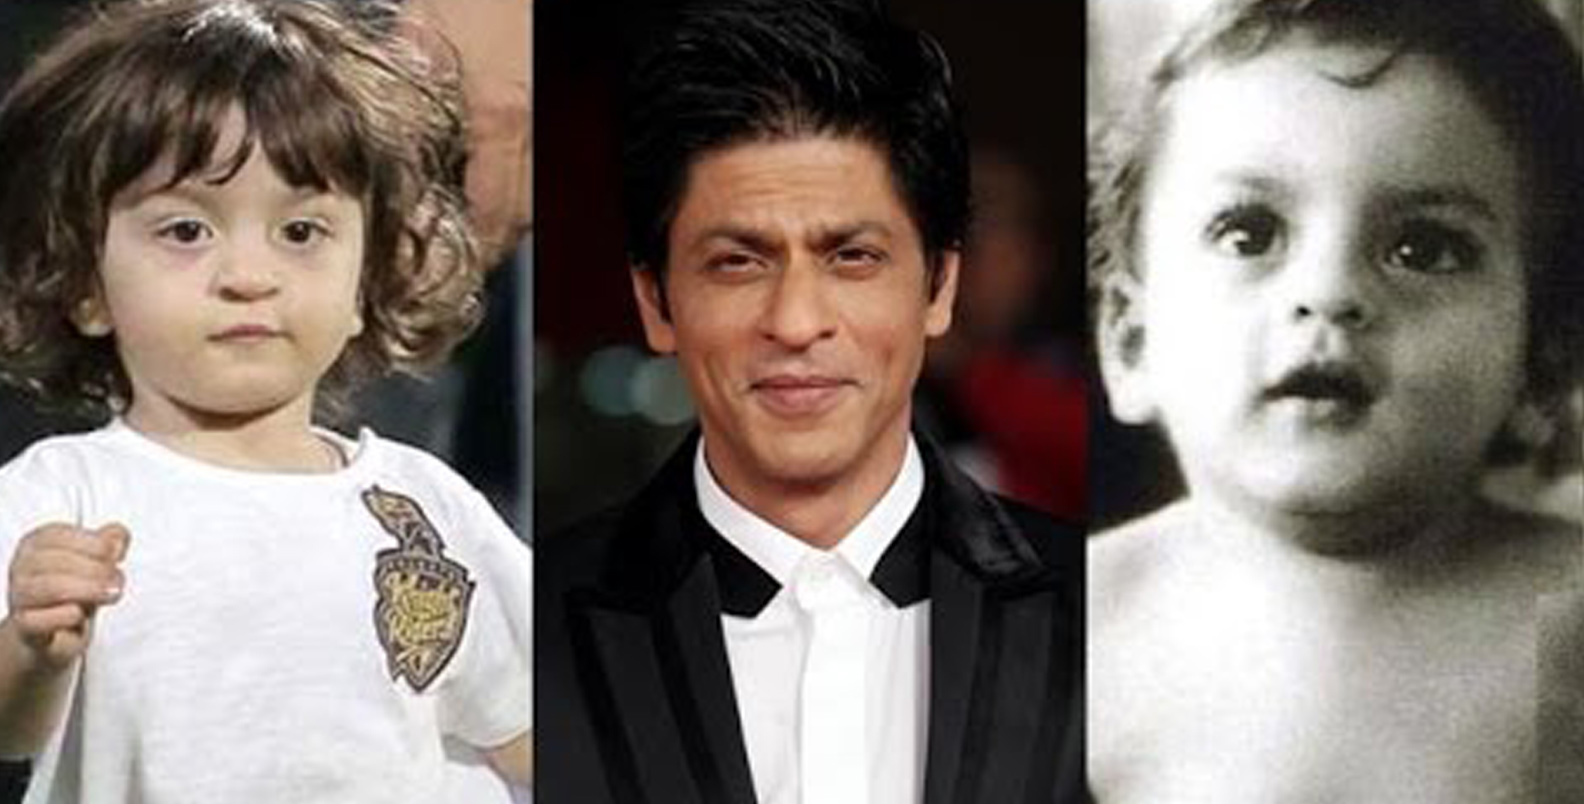 Why is abram Khan fair with brown hair when his parents and elder siblings  have dusky skin and black hair? - Quora